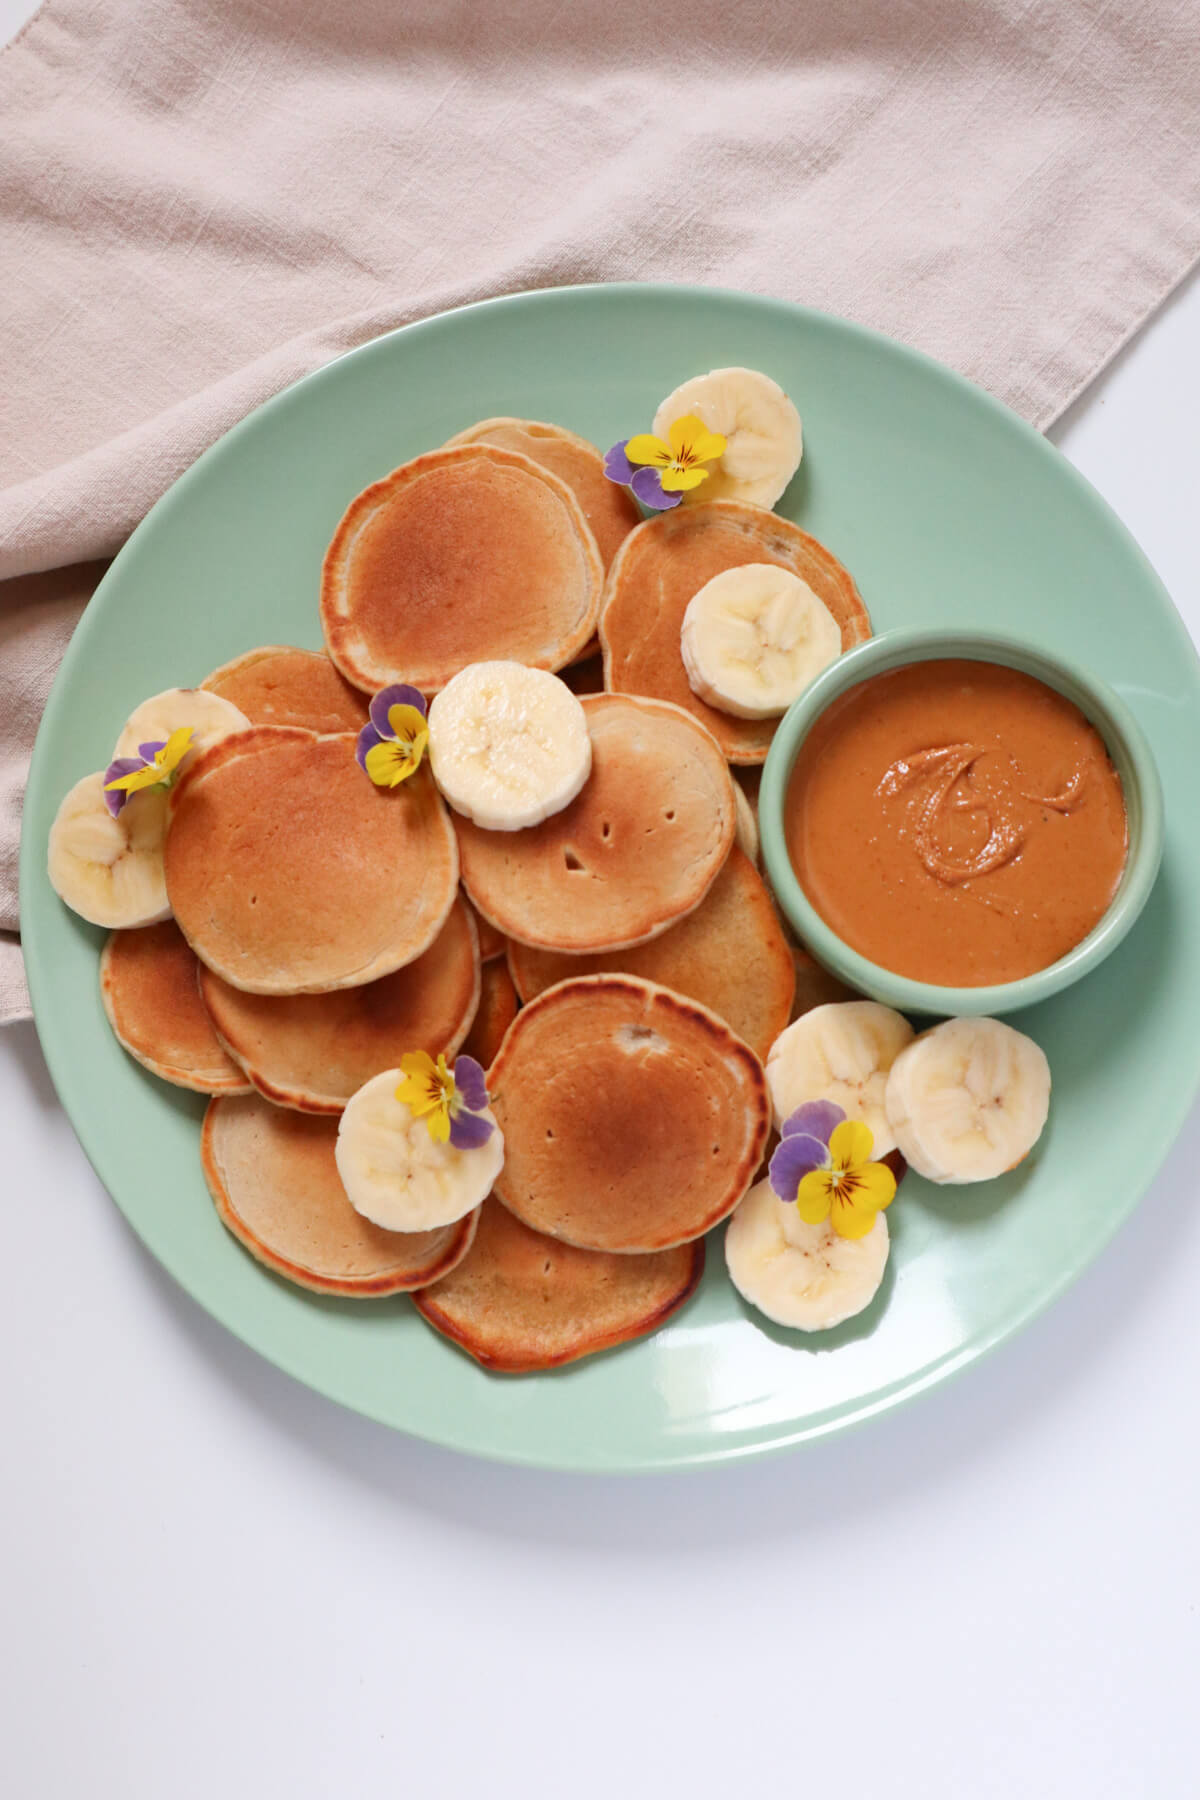 Silver dollar pancakes with peanut butter and banana slices. 